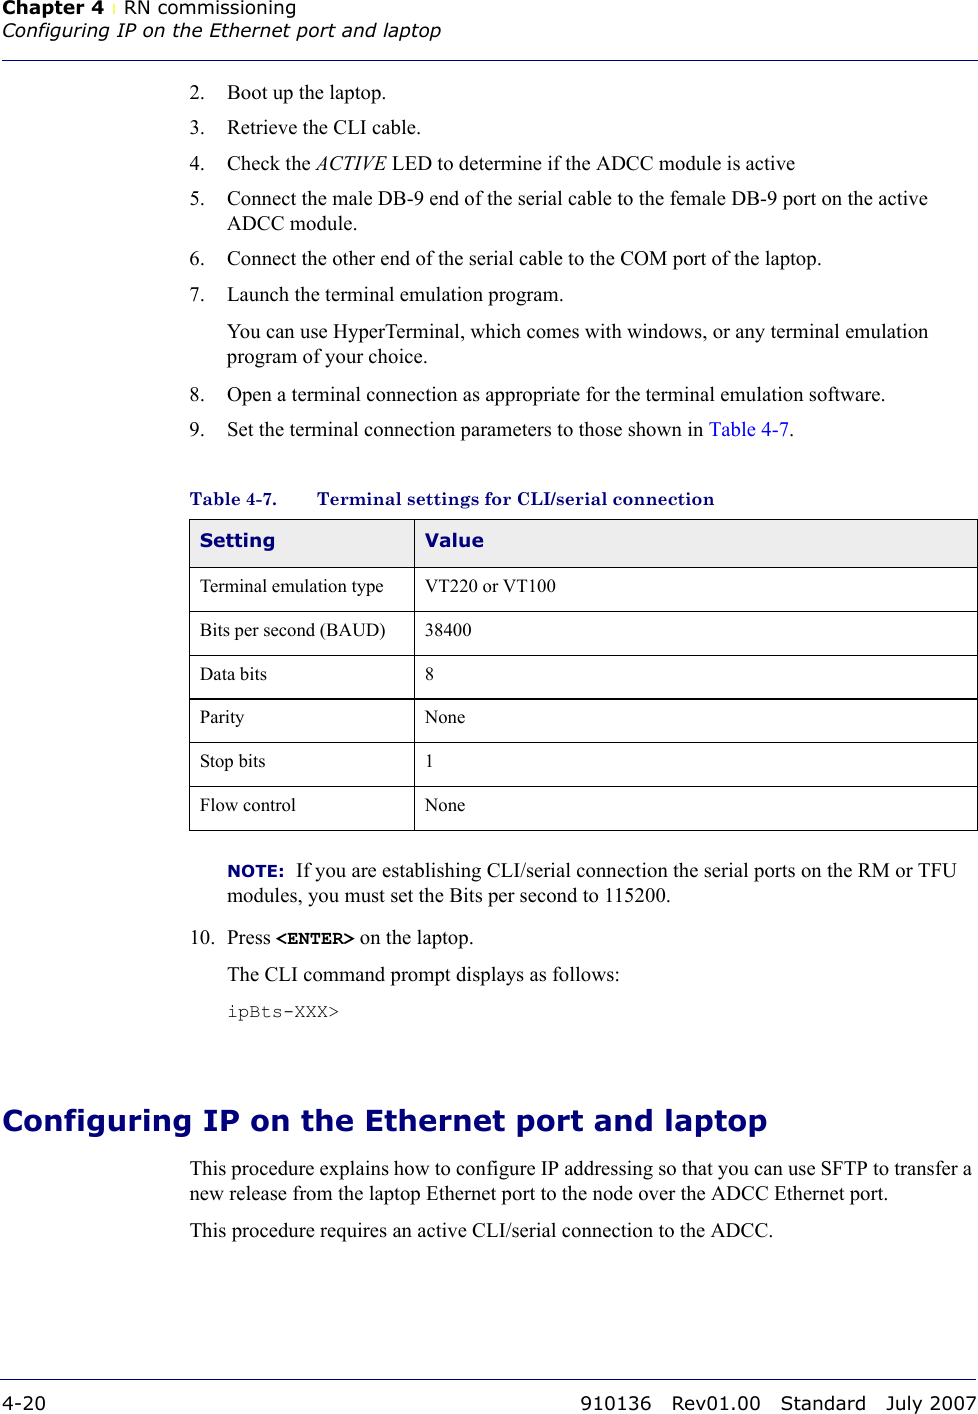 Chapter 4 lRN commissioningConfiguring IP on the Ethernet port and laptop4-20 910136 Rev01.00 Standard July 20072. Boot up the laptop. 3. Retrieve the CLI cable.4. Check the ACTIVE LED to determine if the ADCC module is active 5. Connect the male DB-9 end of the serial cable to the female DB-9 port on the active ADCC module.6. Connect the other end of the serial cable to the COM port of the laptop.7. Launch the terminal emulation program. You can use HyperTerminal, which comes with windows, or any terminal emulation program of your choice.8. Open a terminal connection as appropriate for the terminal emulation software.9. Set the terminal connection parameters to those shown in Table 4-7.NOTE:  If you are establishing CLI/serial connection the serial ports on the RM or TFU modules, you must set the Bits per second to 115200.10. Press &lt;ENTER&gt; on the laptop. The CLI command prompt displays as follows:ipBts-XXX&gt;Configuring IP on the Ethernet port and laptopThis procedure explains how to configure IP addressing so that you can use SFTP to transfer a new release from the laptop Ethernet port to the node over the ADCC Ethernet port. This procedure requires an active CLI/serial connection to the ADCC.Table 4-7. Terminal settings for CLI/serial connectionSetting ValueTerminal emulation type VT220 or VT100Bits per second (BAUD) 38400Data bits 8Parity NoneStop bits 1Flow control None